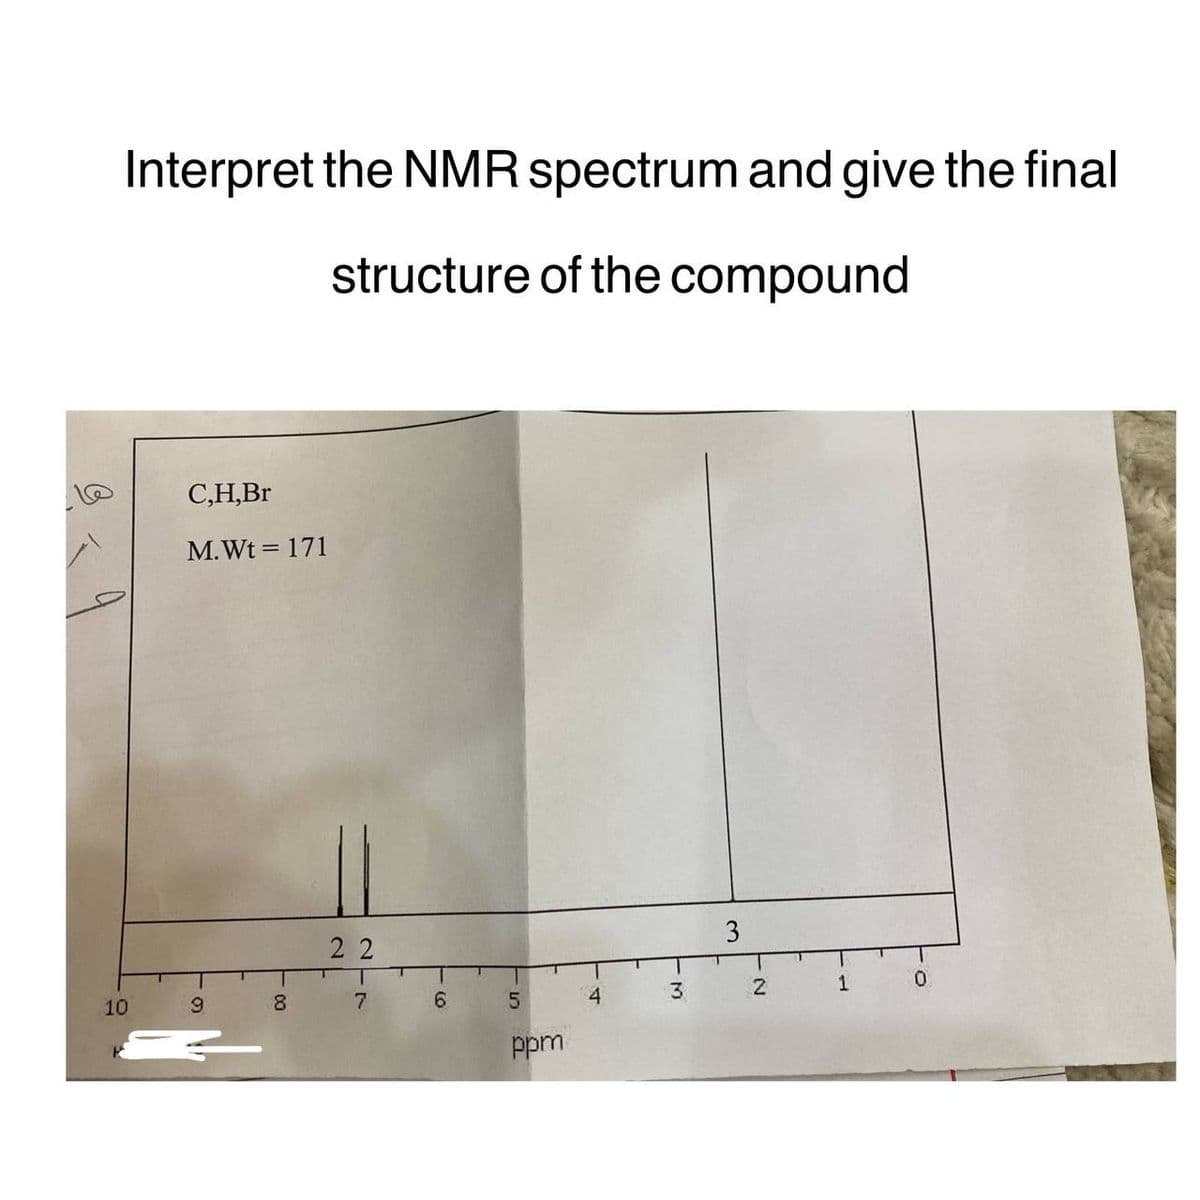 Interpret the NMR spectrum and give the final
structure of the compound
10
C,H,Br
M.Wt = 171
9
-
8
217
22
T
6
5
сл
ppm
4
3
3
N
1
0